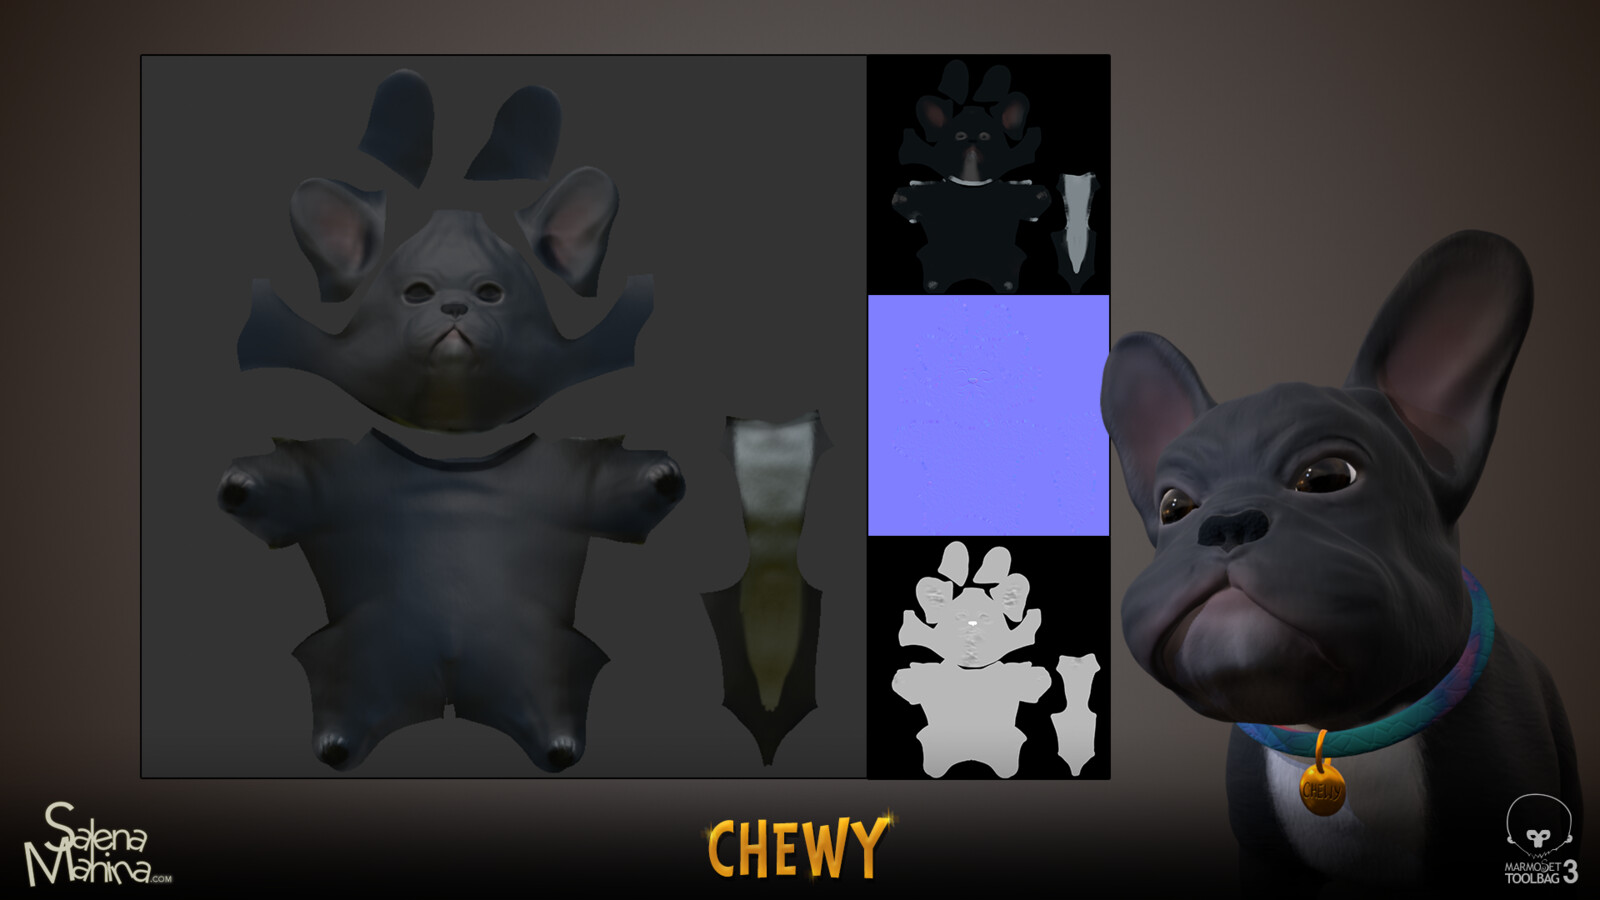 Chewy textures (Albedo, normals, roughness)